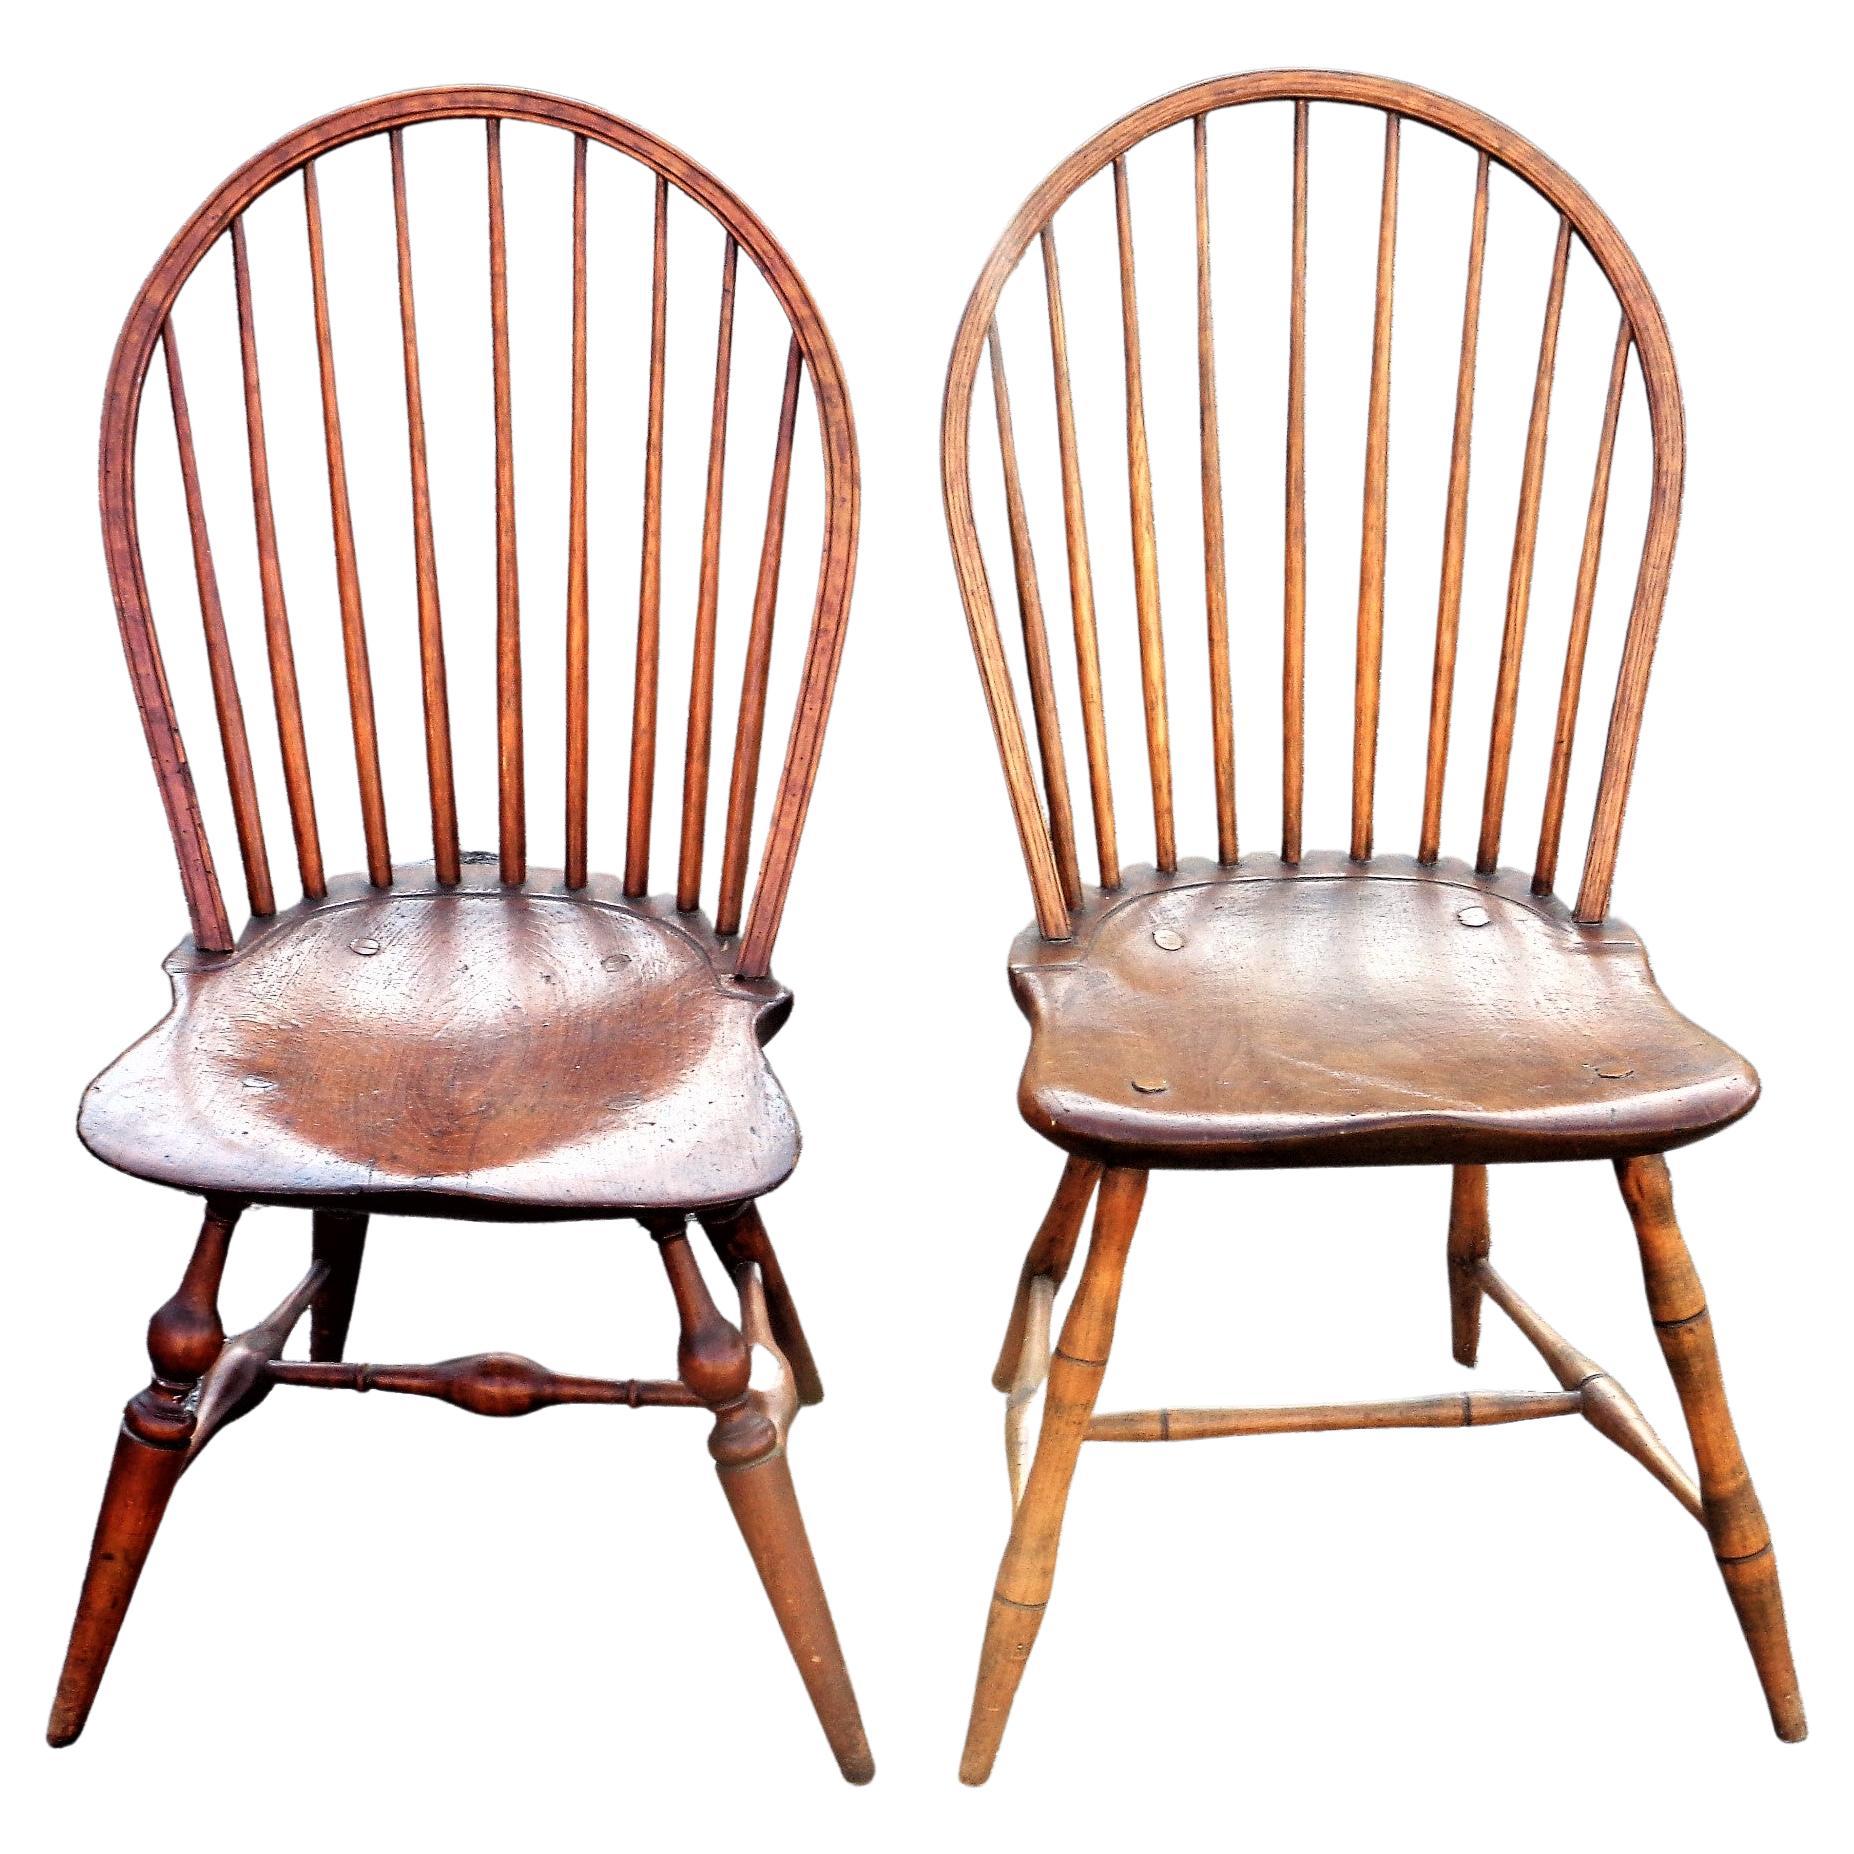 A near pair of antique American bow back Windsor side chairs in nicely aged color and original period construction. One chair has darker finish, a slightly more dished saddle seat and bolder turnings at legs / stretchers. Circa 1790-1800. Look at